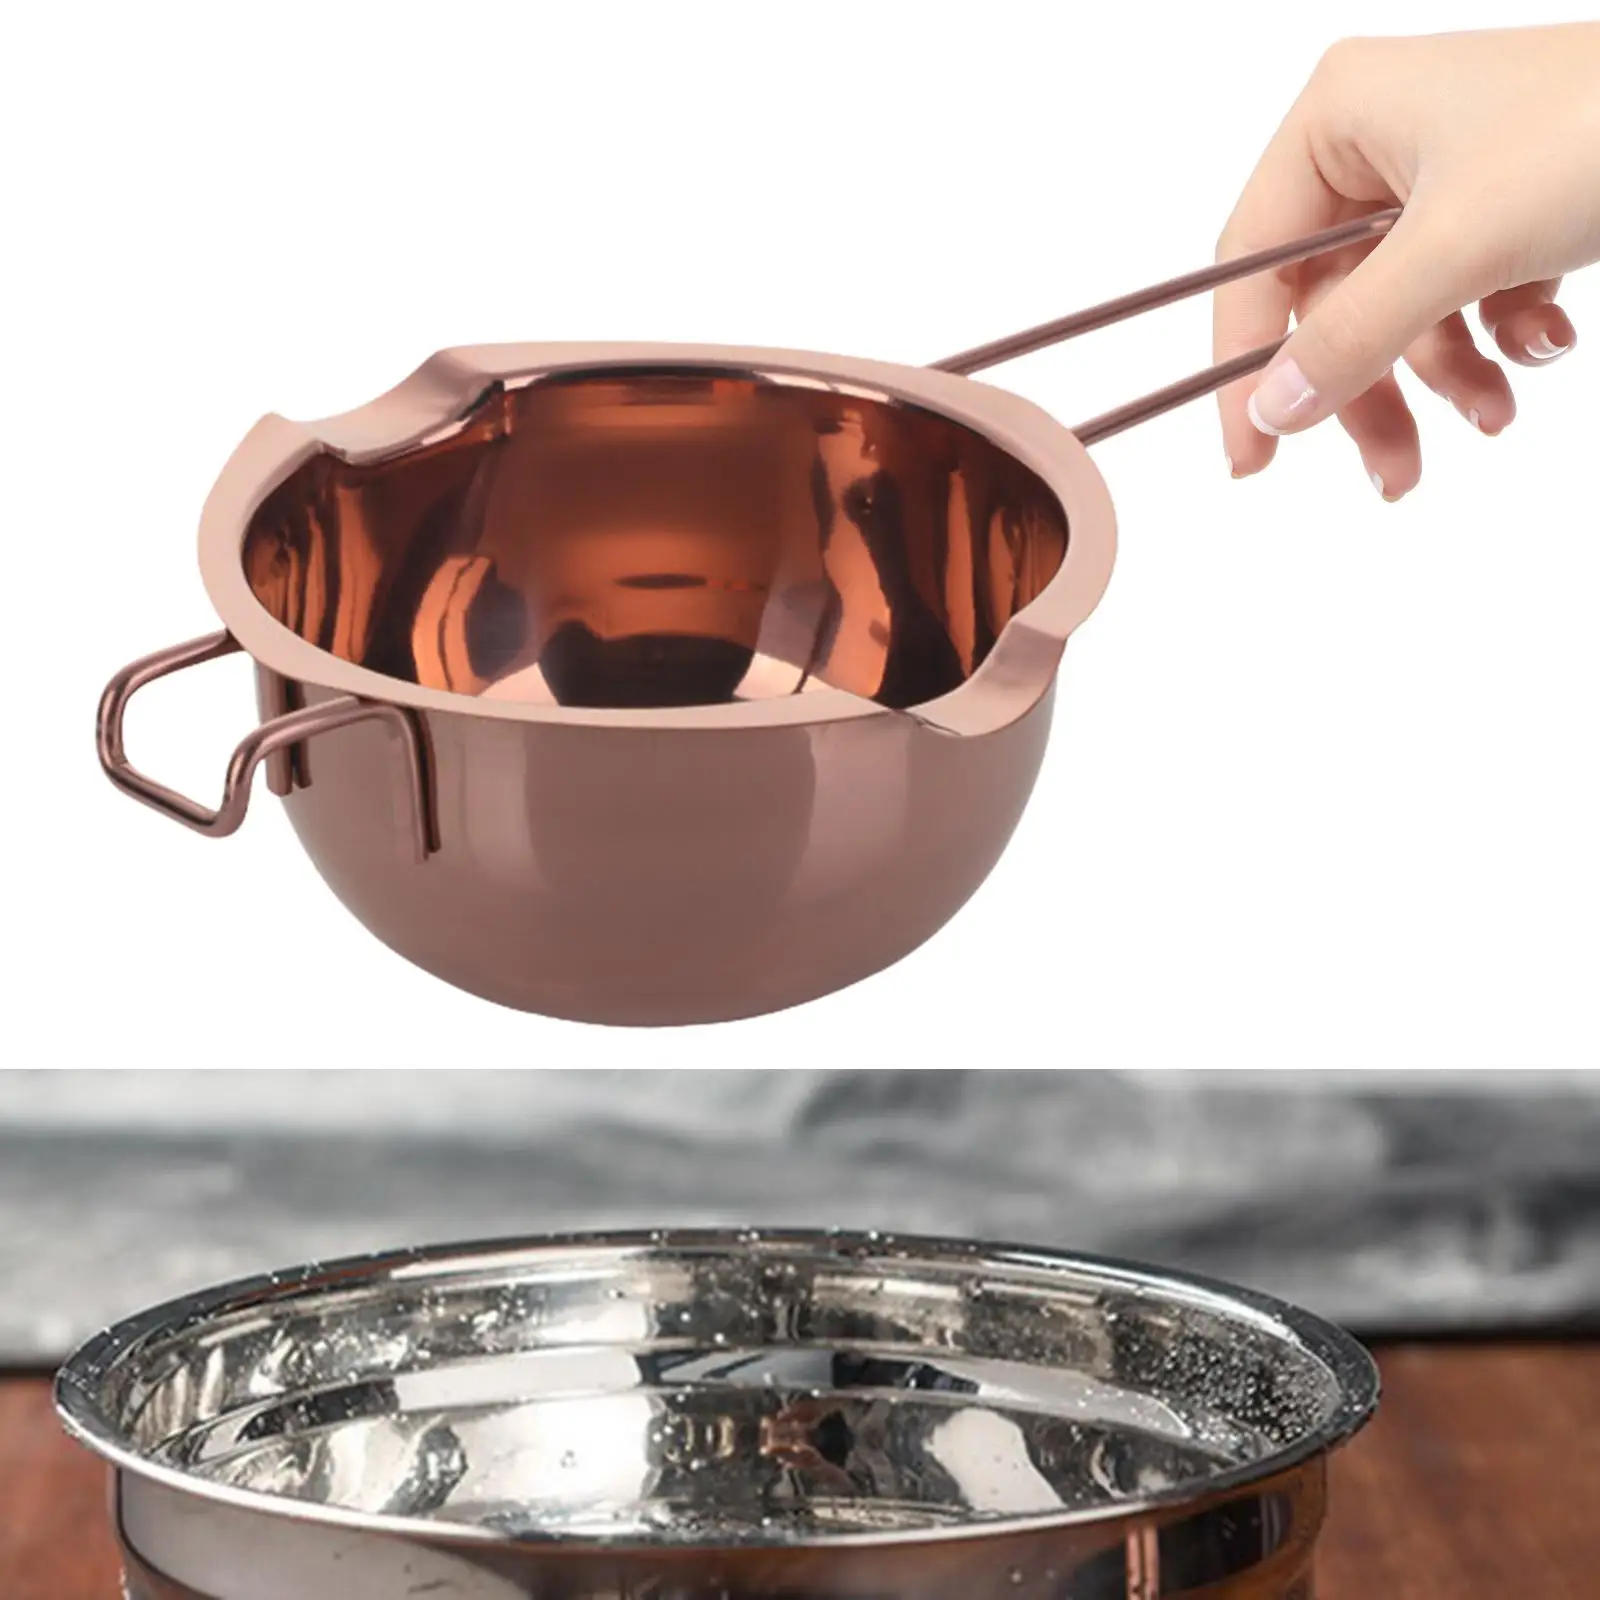 400ml Double Boiler Melting Pot for Melting Chocolate. Essential Cookware.